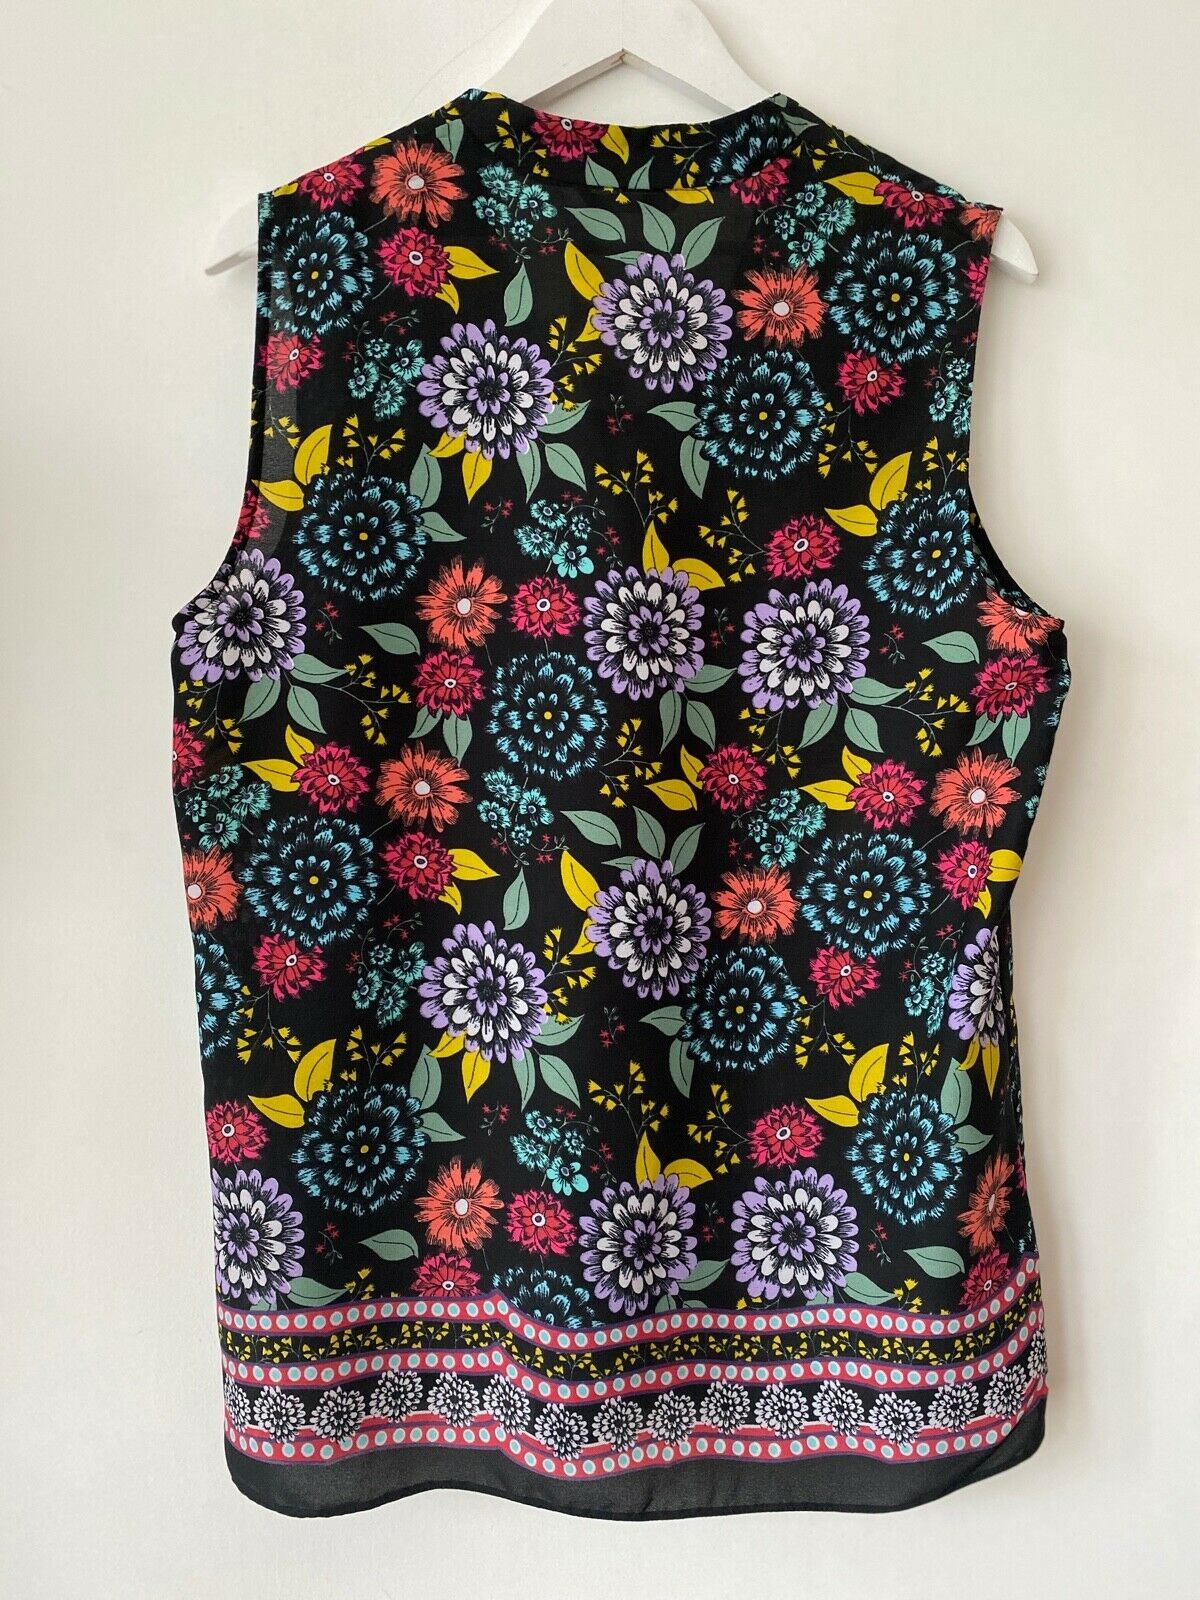 George Sleeveless Floral Blouse Size 16